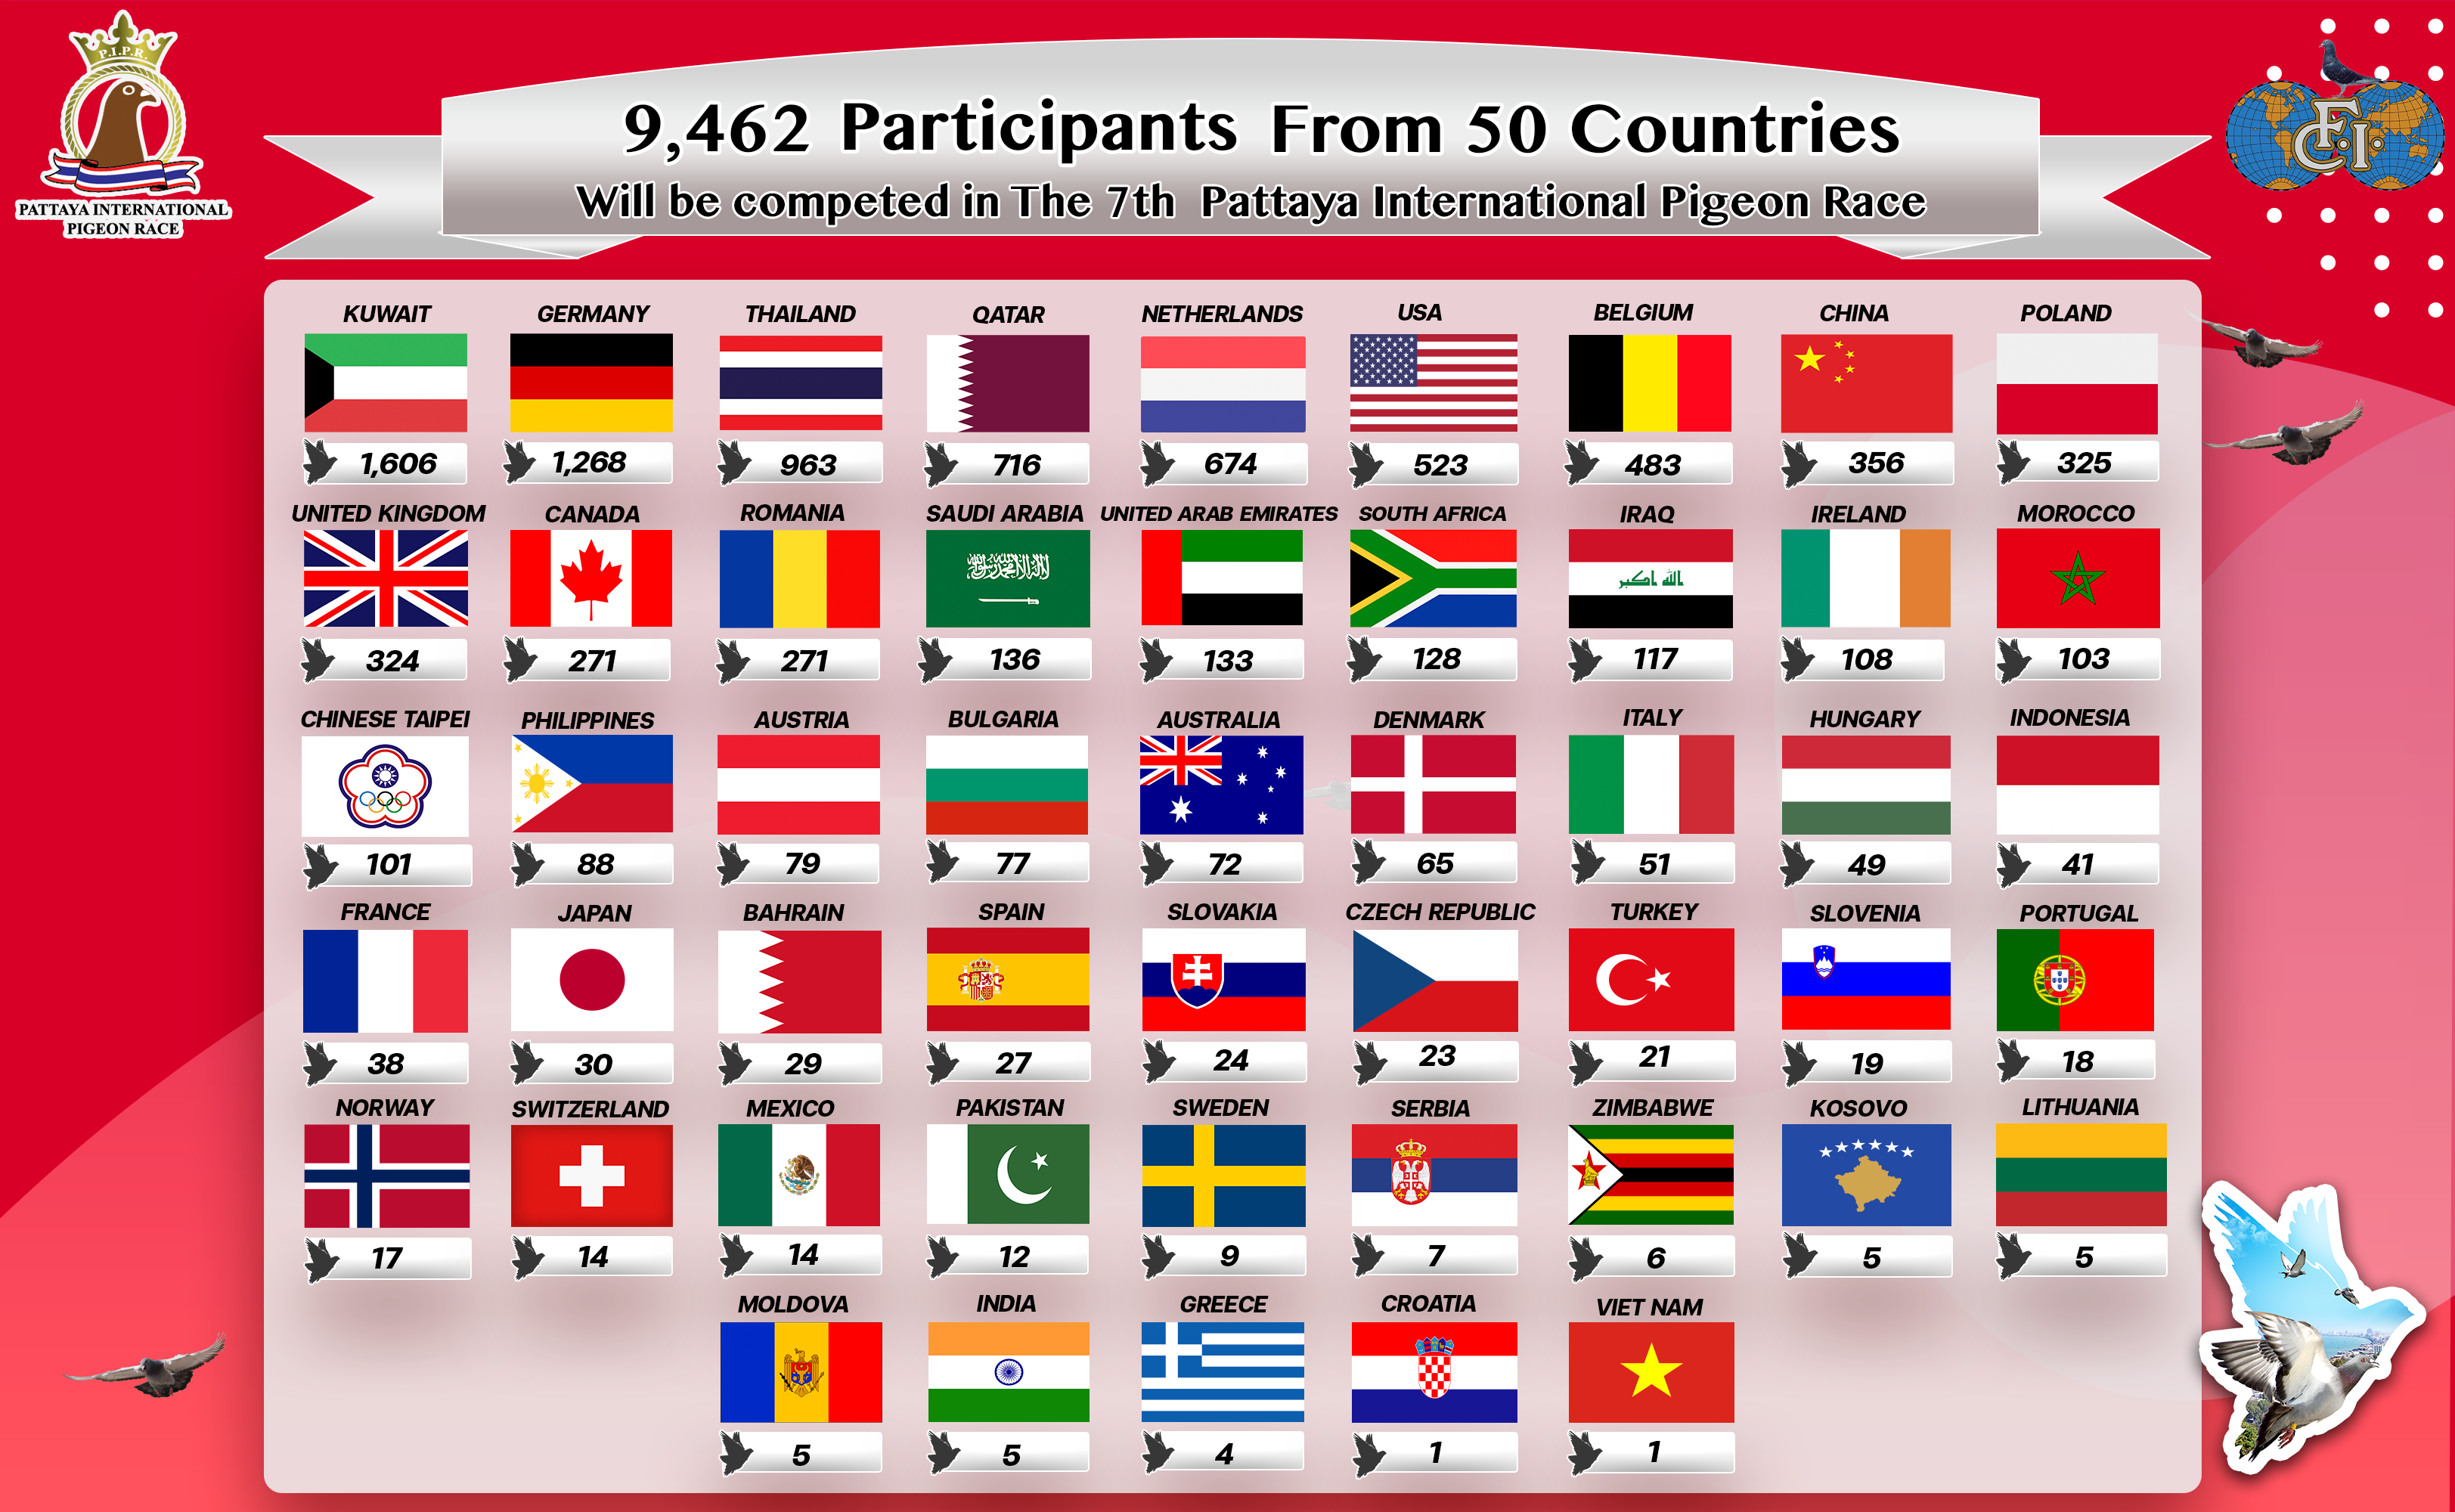 The official announcement participants in the 7th PIPR